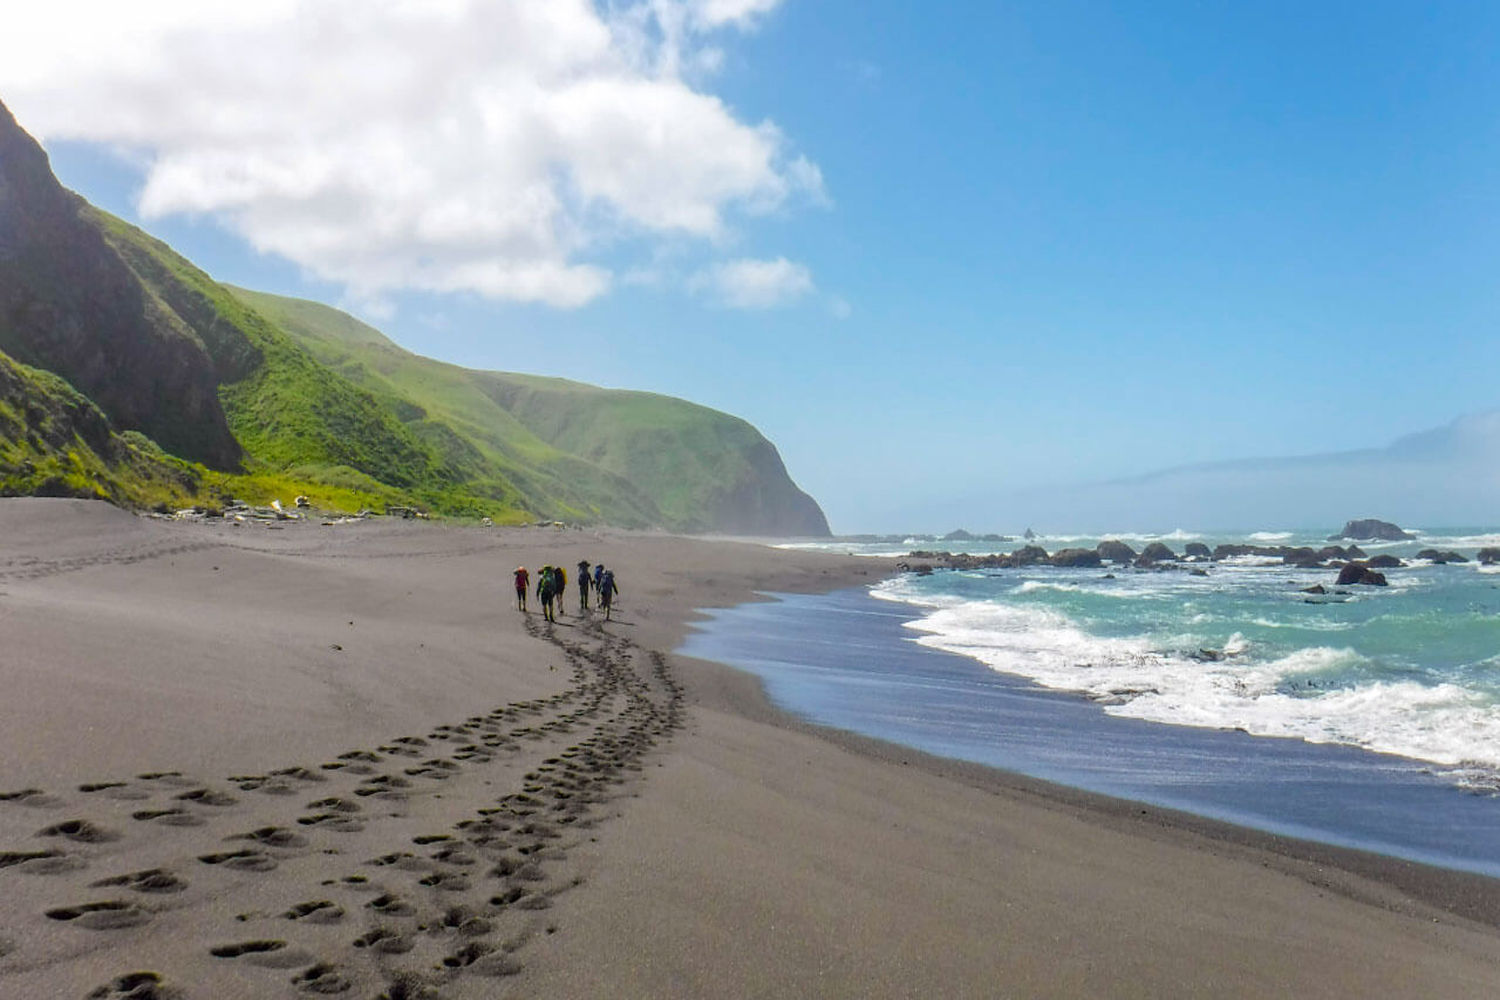 Adventurers leaving footprints on the sand along the shores of California’s Lost Coast.